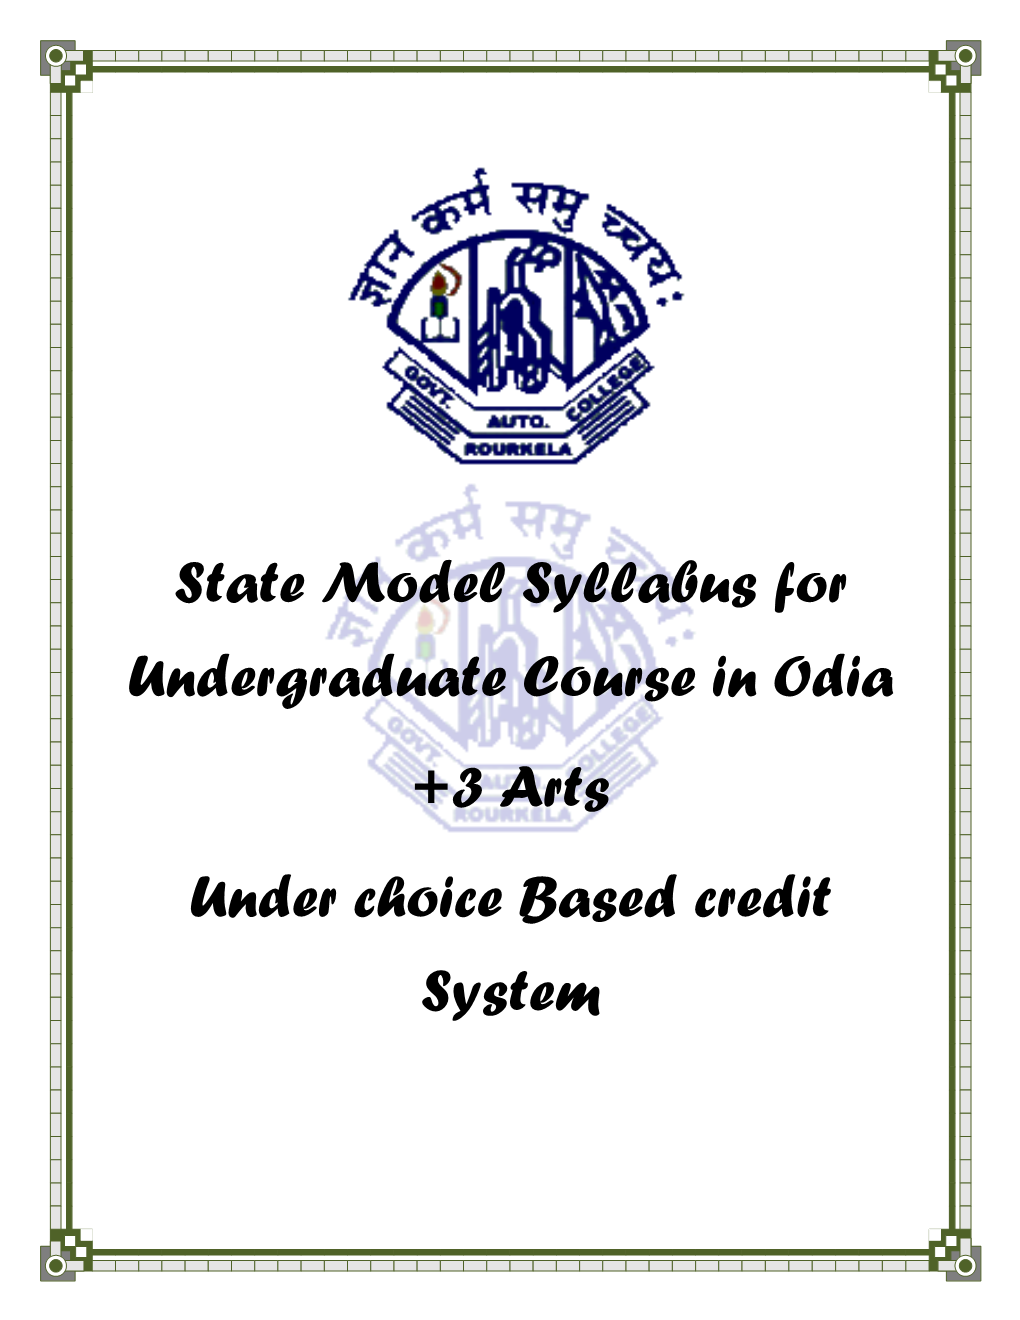 State Model Syllabus for Undergraduate Course in Odia +3 Arts Under Choice Based Credit